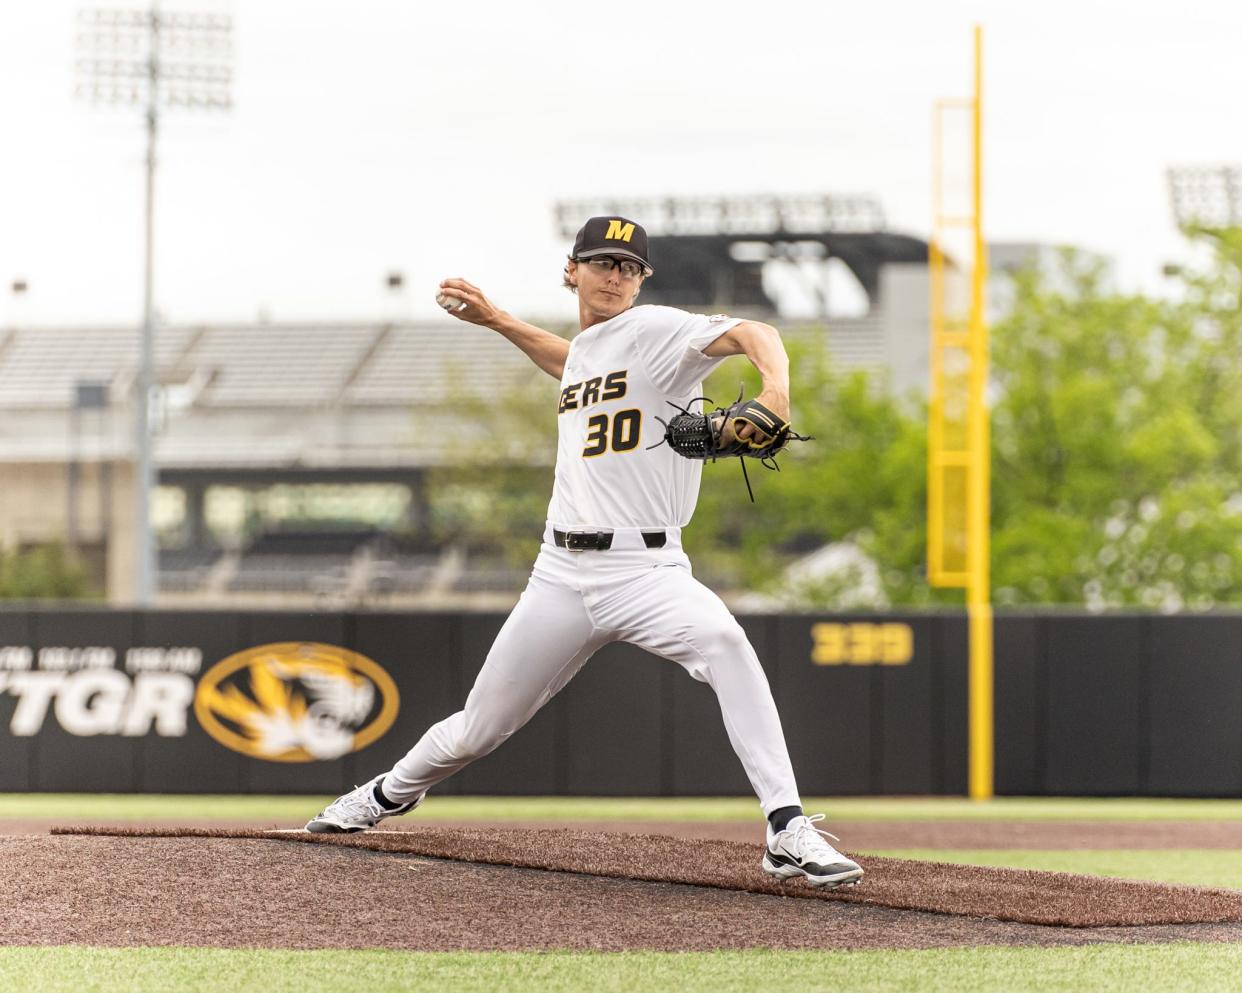 Missouri pitcher Carter Rustad throws during the Tigers' win over South Carolina on Saturday at Taylor Stadium in Columbia.